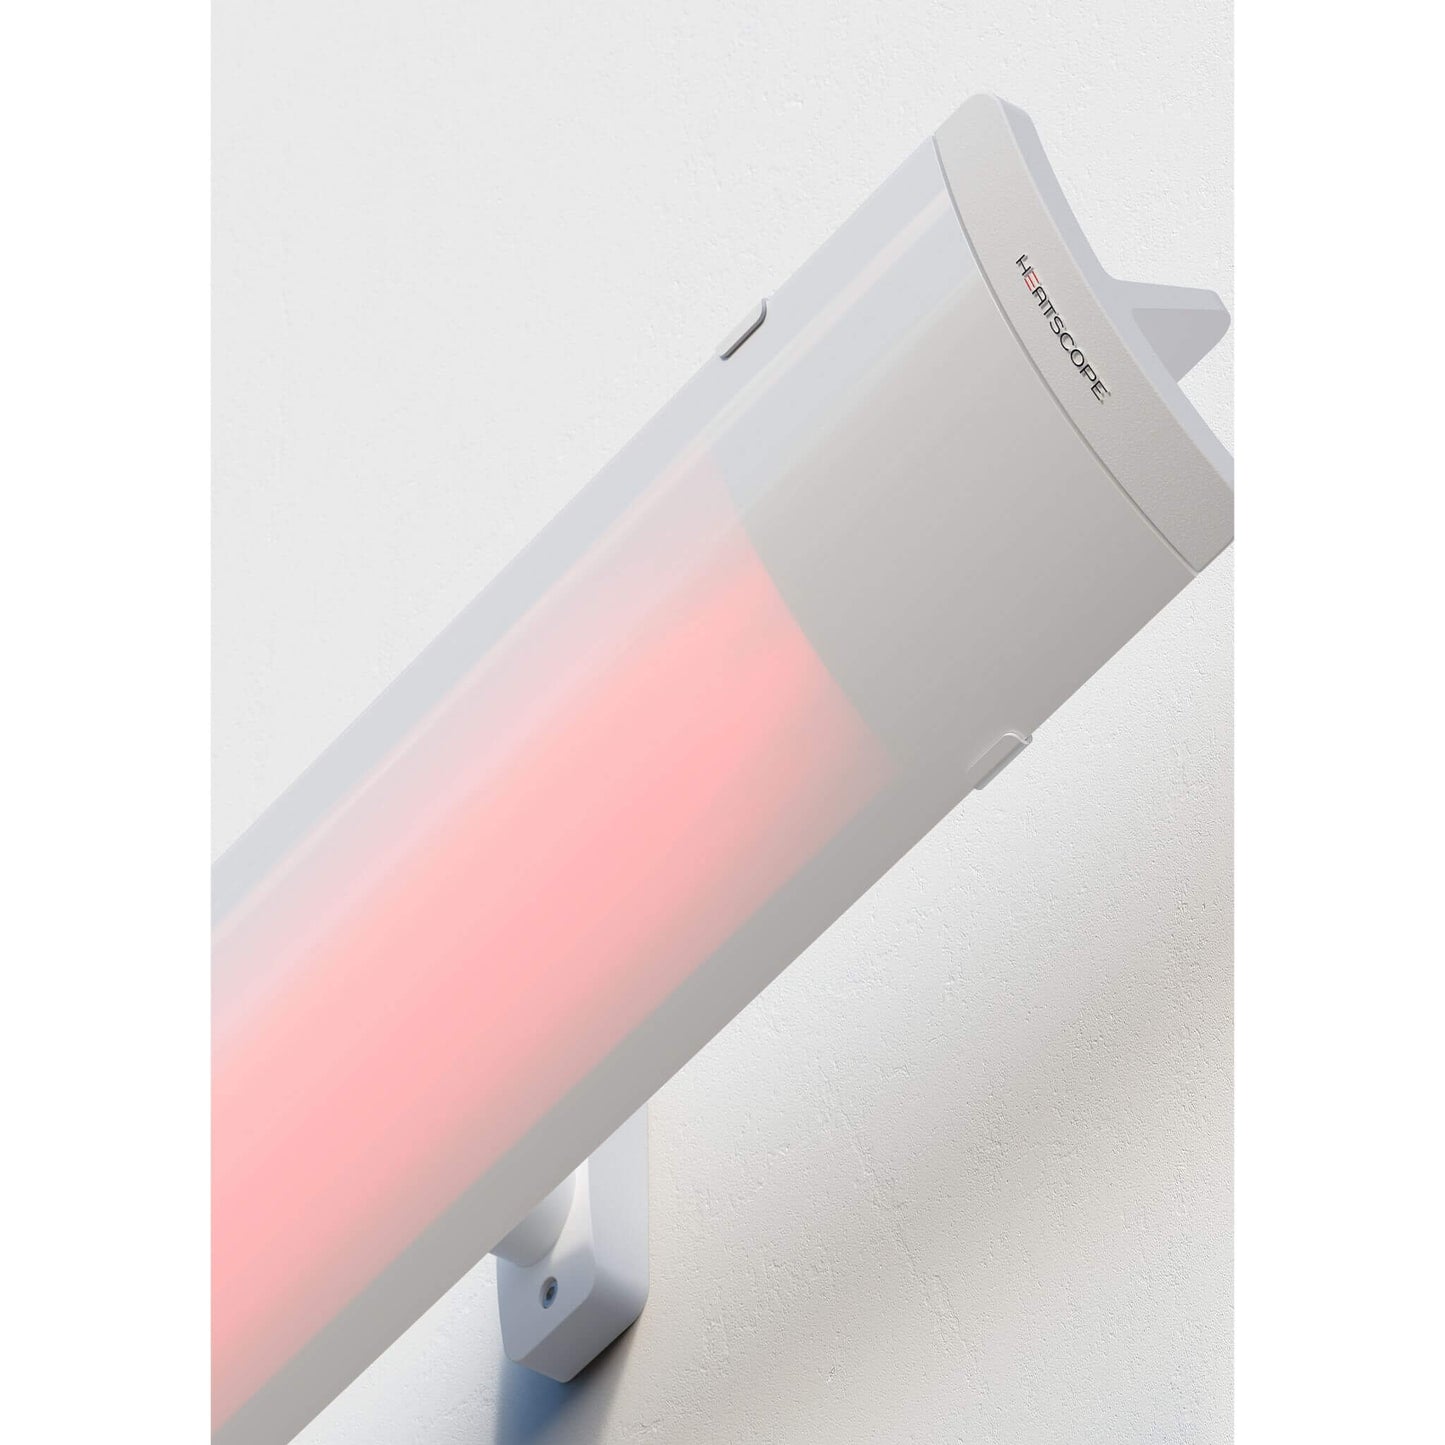 Heatscope Pure radiant heater in white - close up of infrared panels with wall mounted parts